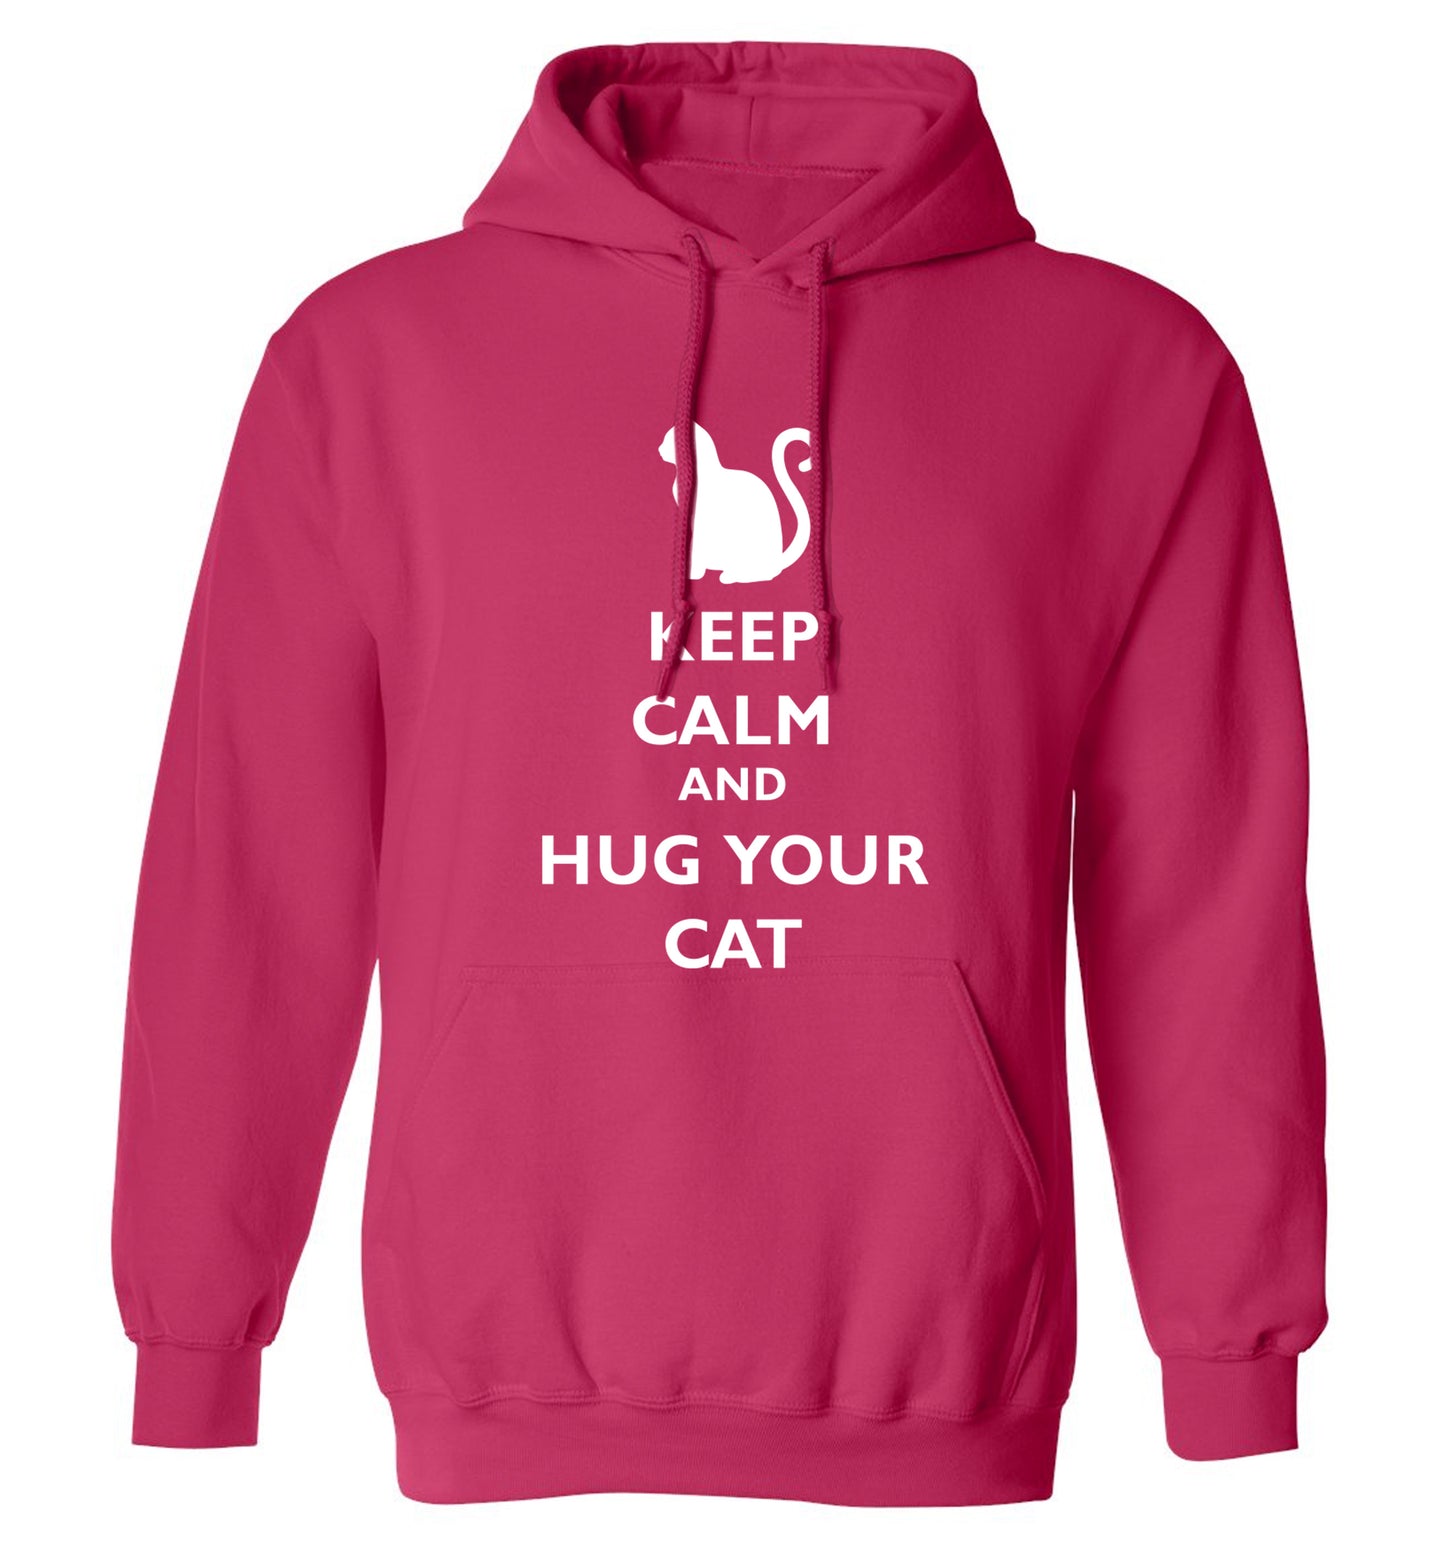 Keep calm and hug your cat adults unisex pink hoodie 2XL